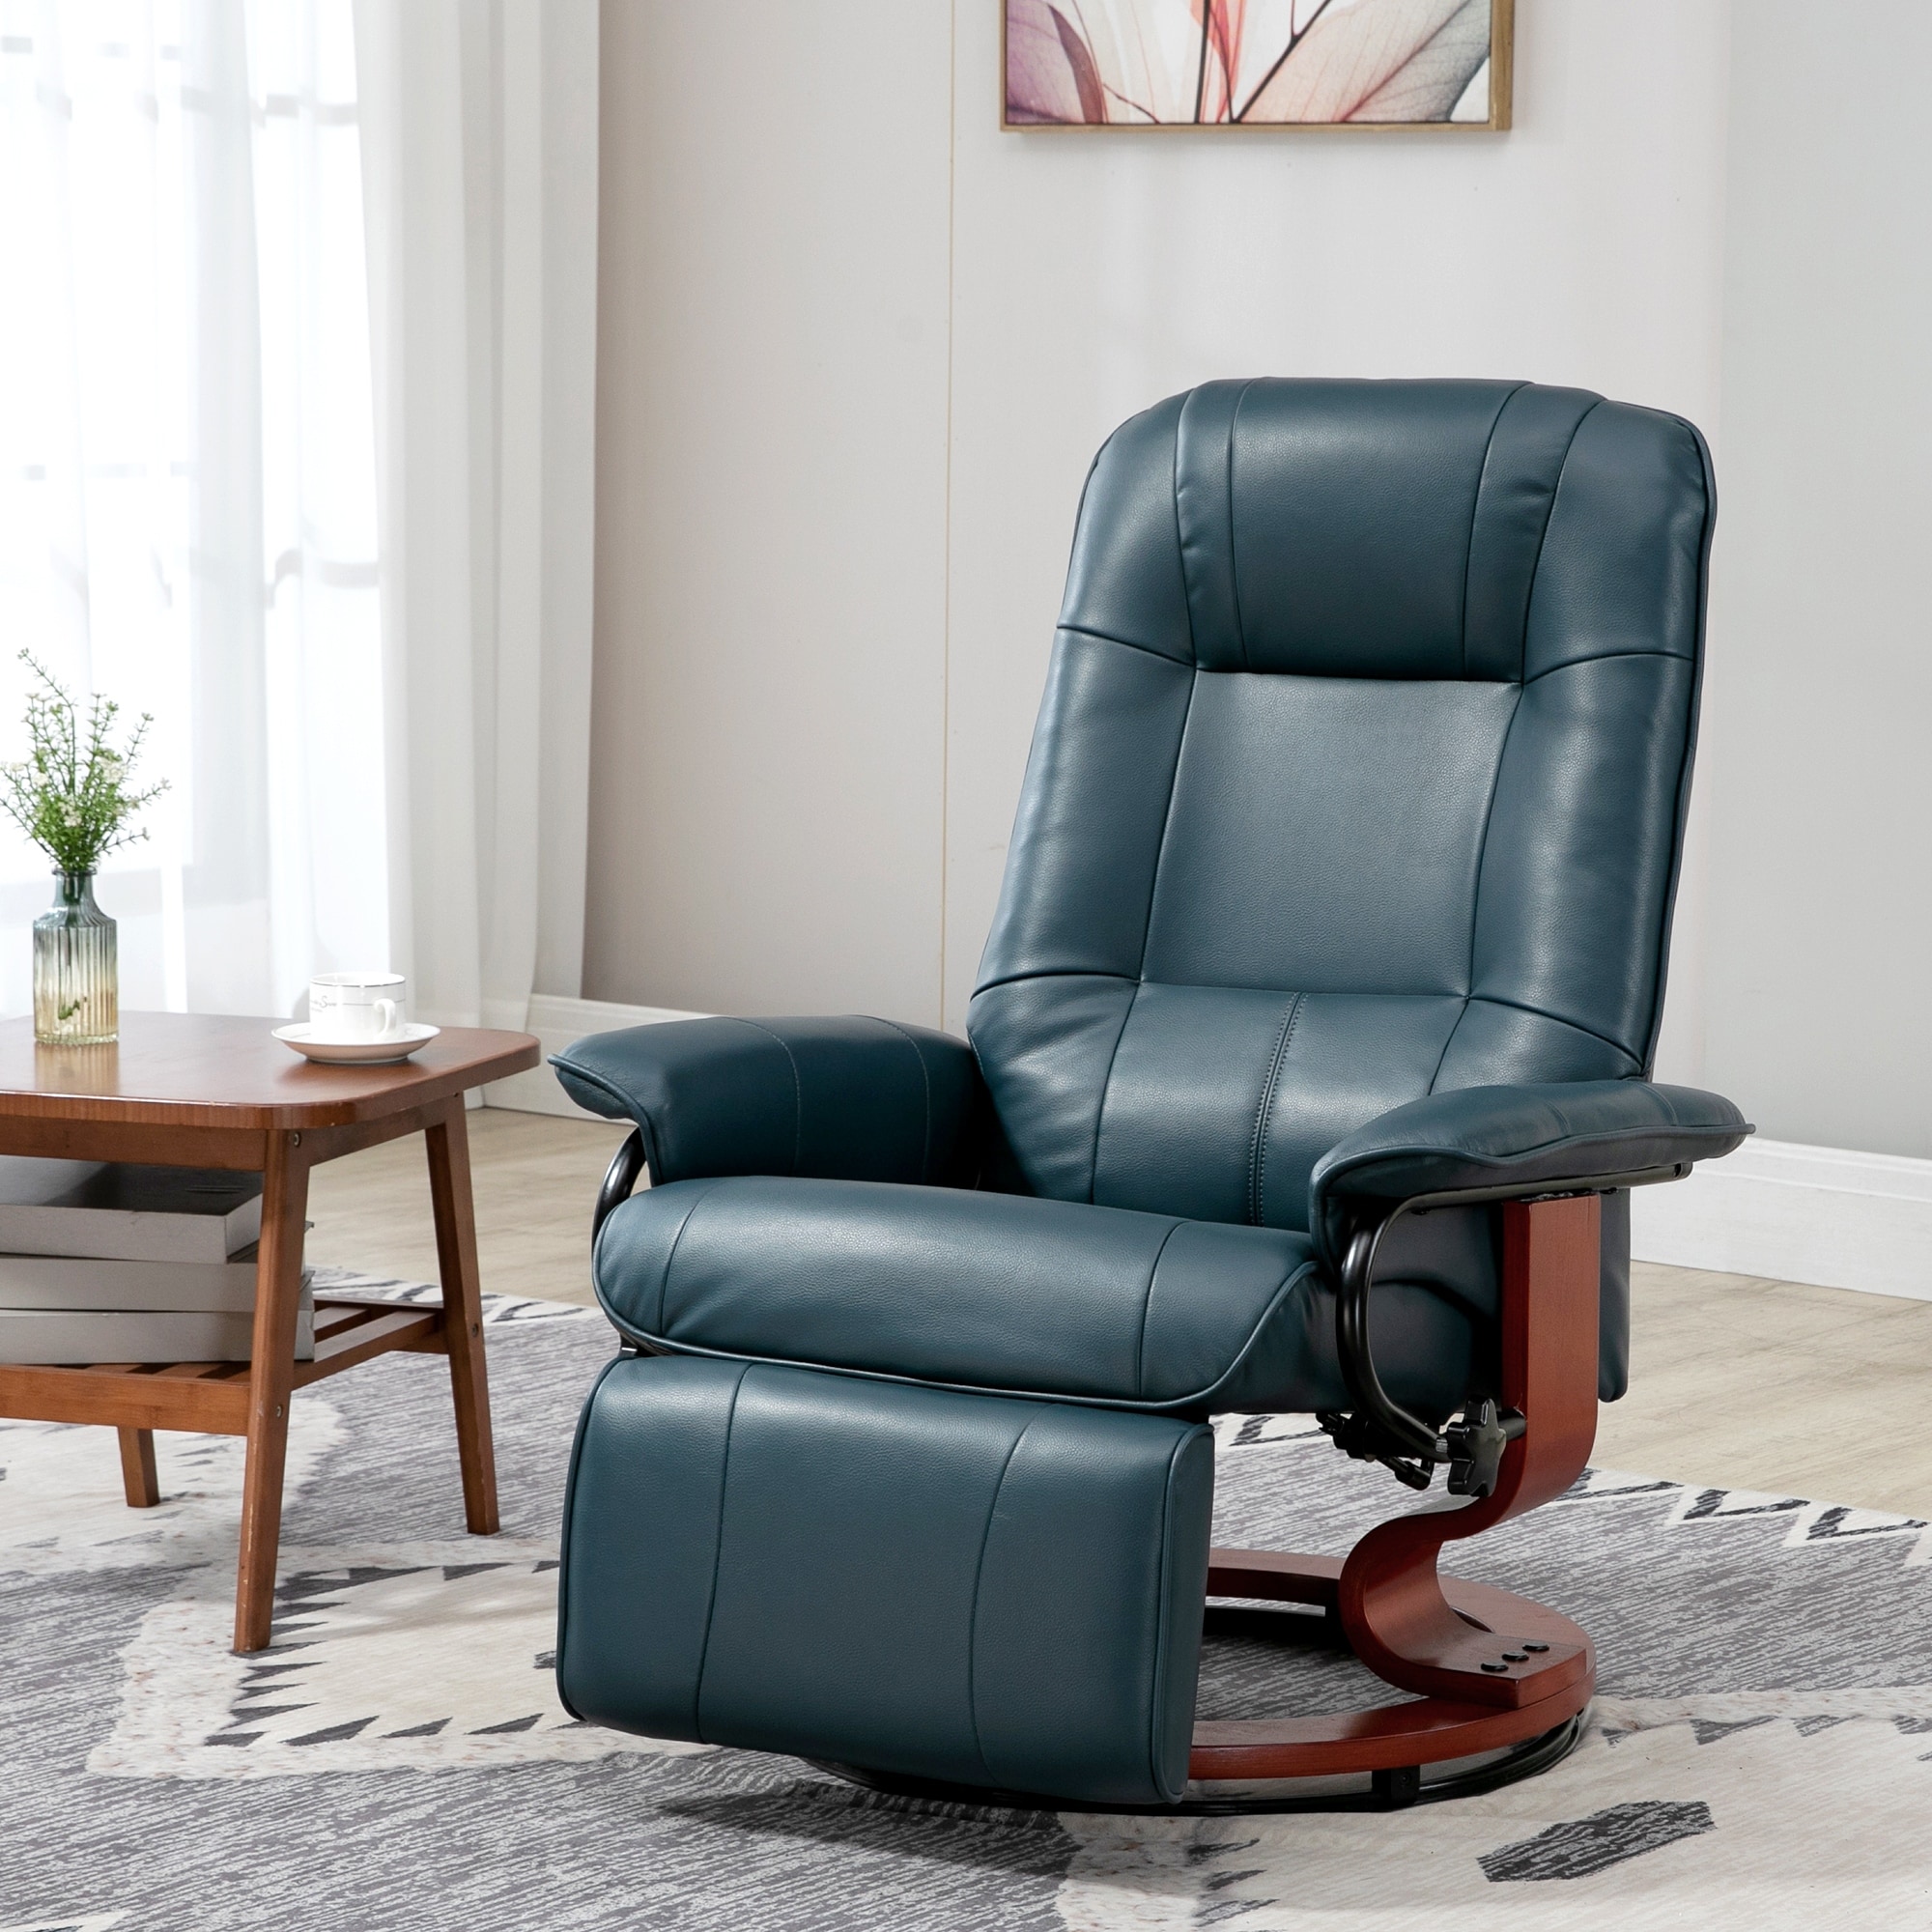 Mcombo Recliner with Ottoman Reclining Chair with Vibration Massage and Lumbar Pillow, 360 Degree Swivel Wood Base, Faux Leather 9068